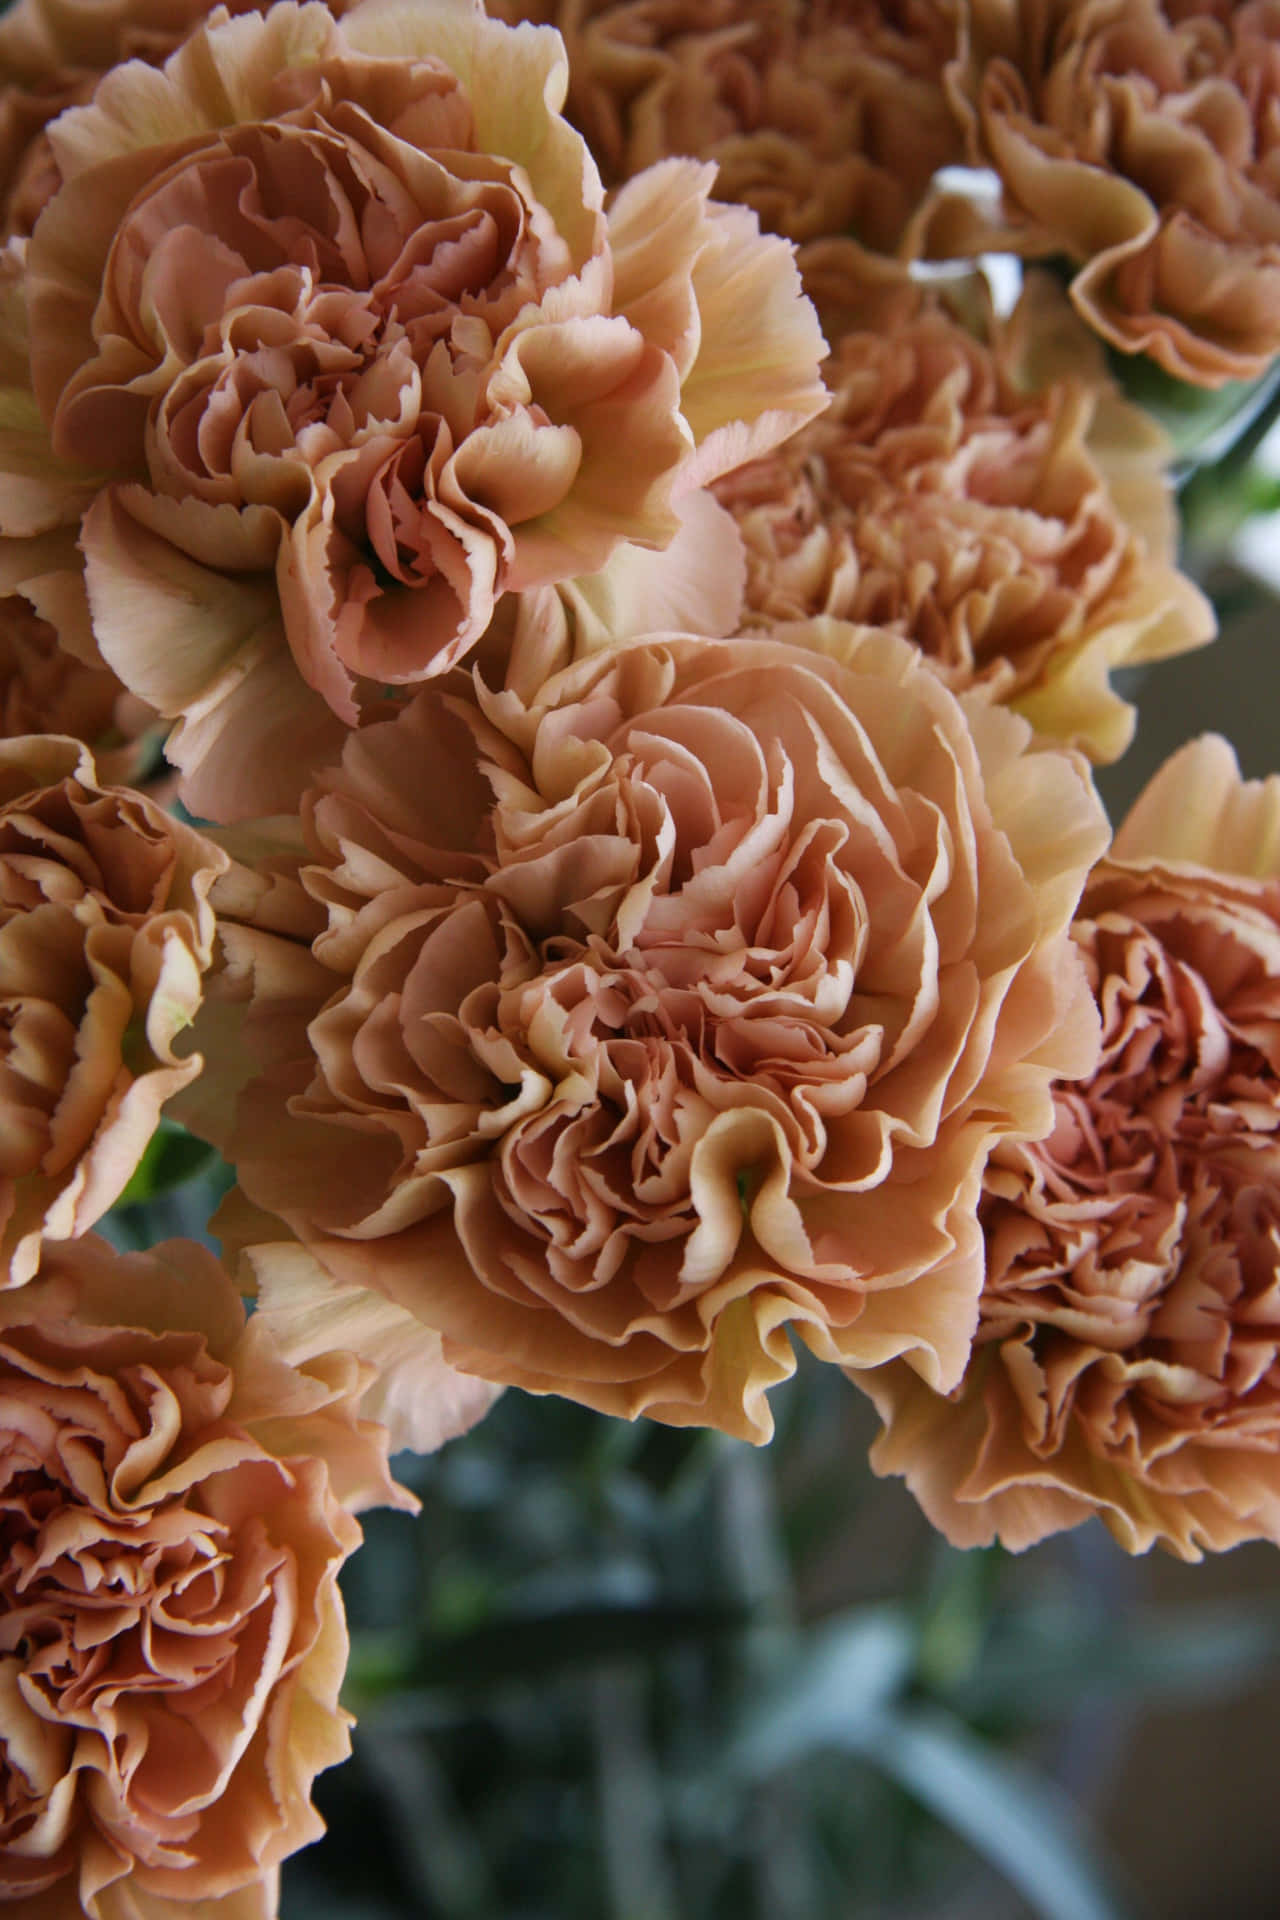 Enjoy a beautiful bouquet of multi-colored carnations